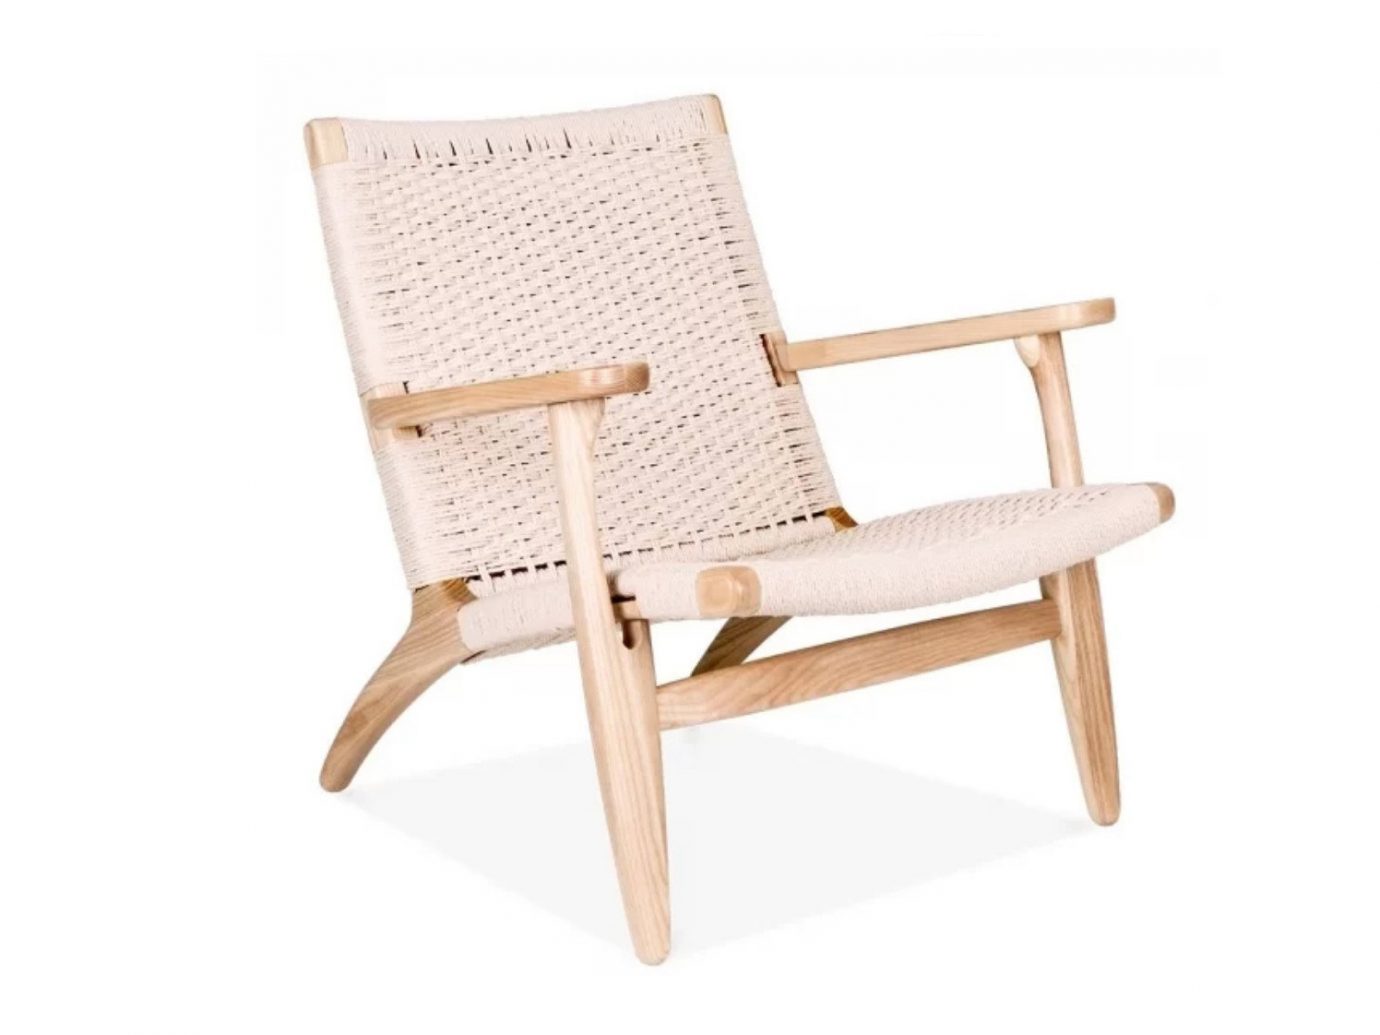 Style + Design Travel Shop chair seat furniture product wooden outdoor furniture product design wood wicker armrest outdoor table